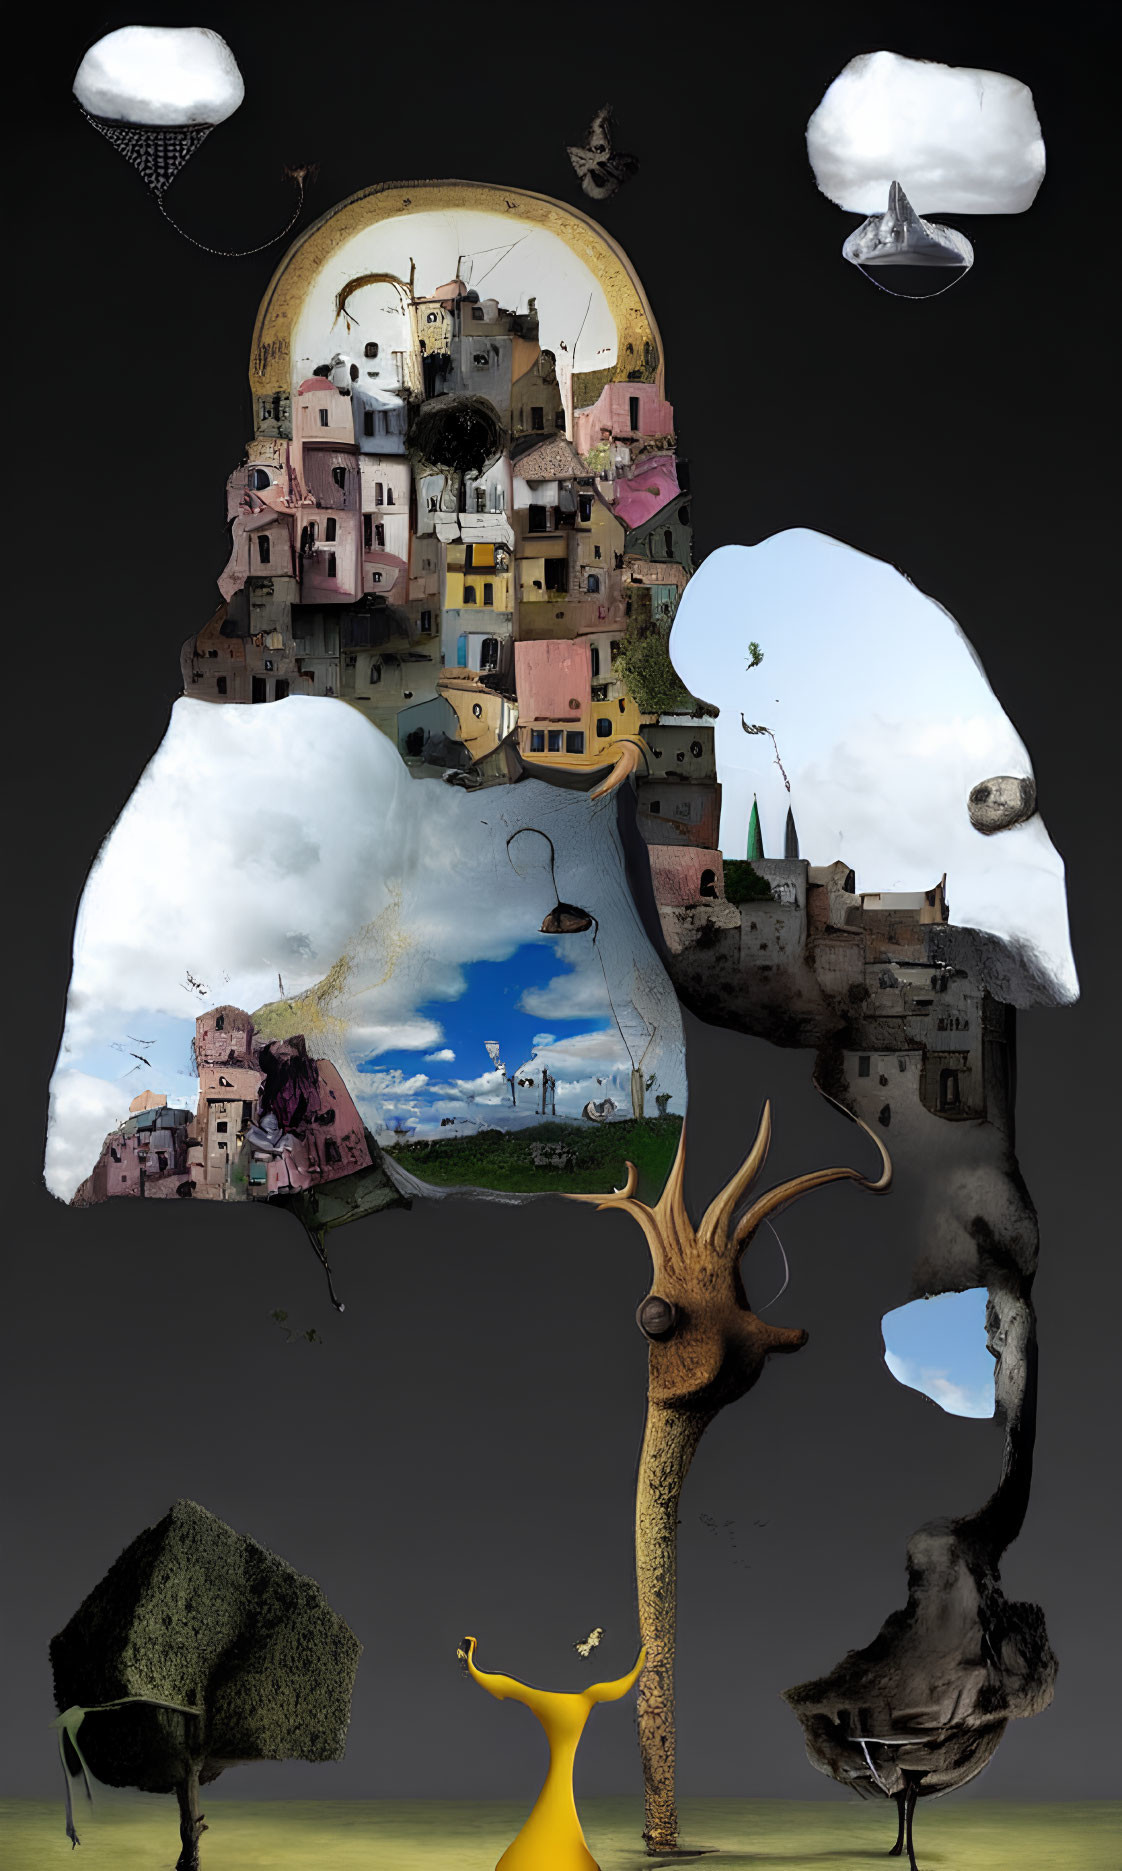 Surreal artwork: Floating islands form head silhouette with structures, wildlife, figure in yellow dress